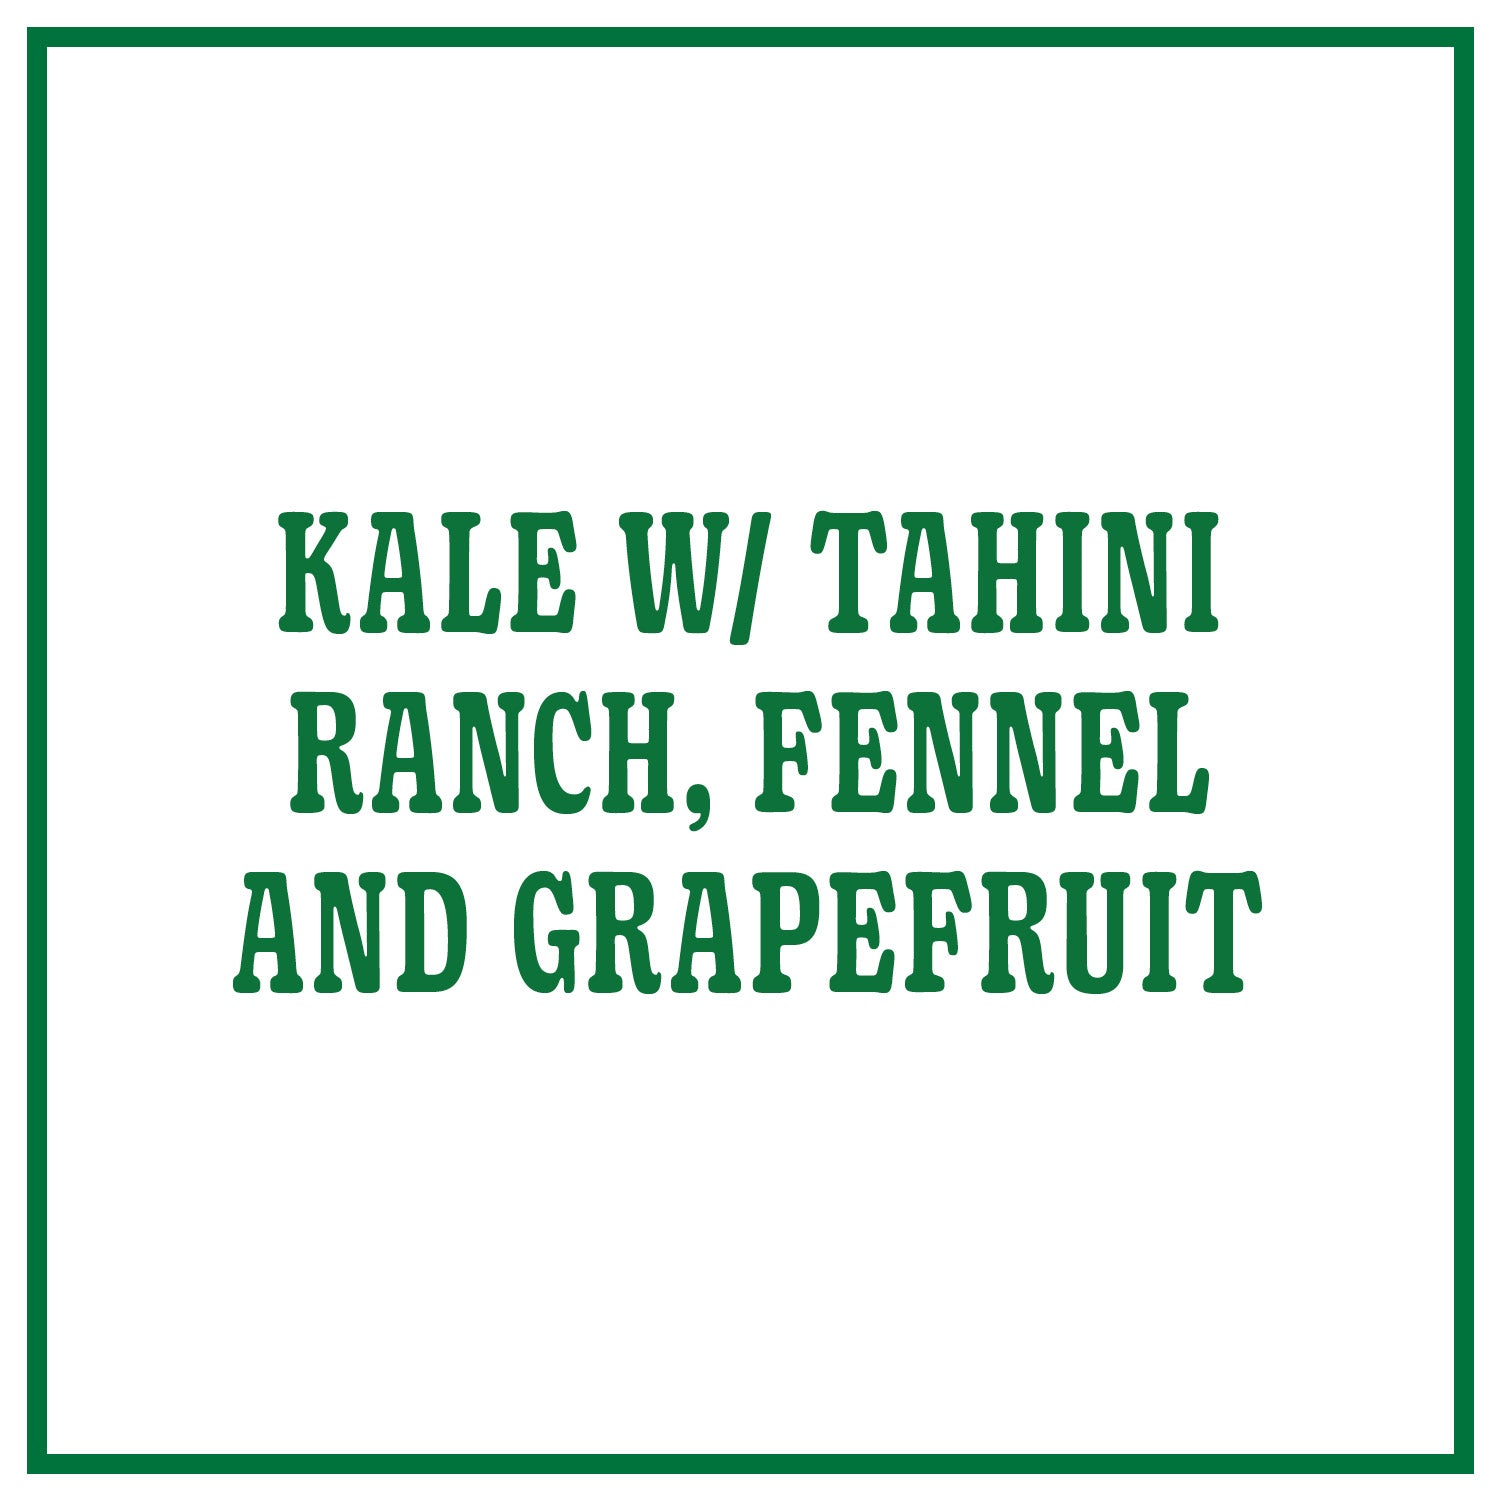 Kale with Tahini Ranch, Fennel and Grapefruit